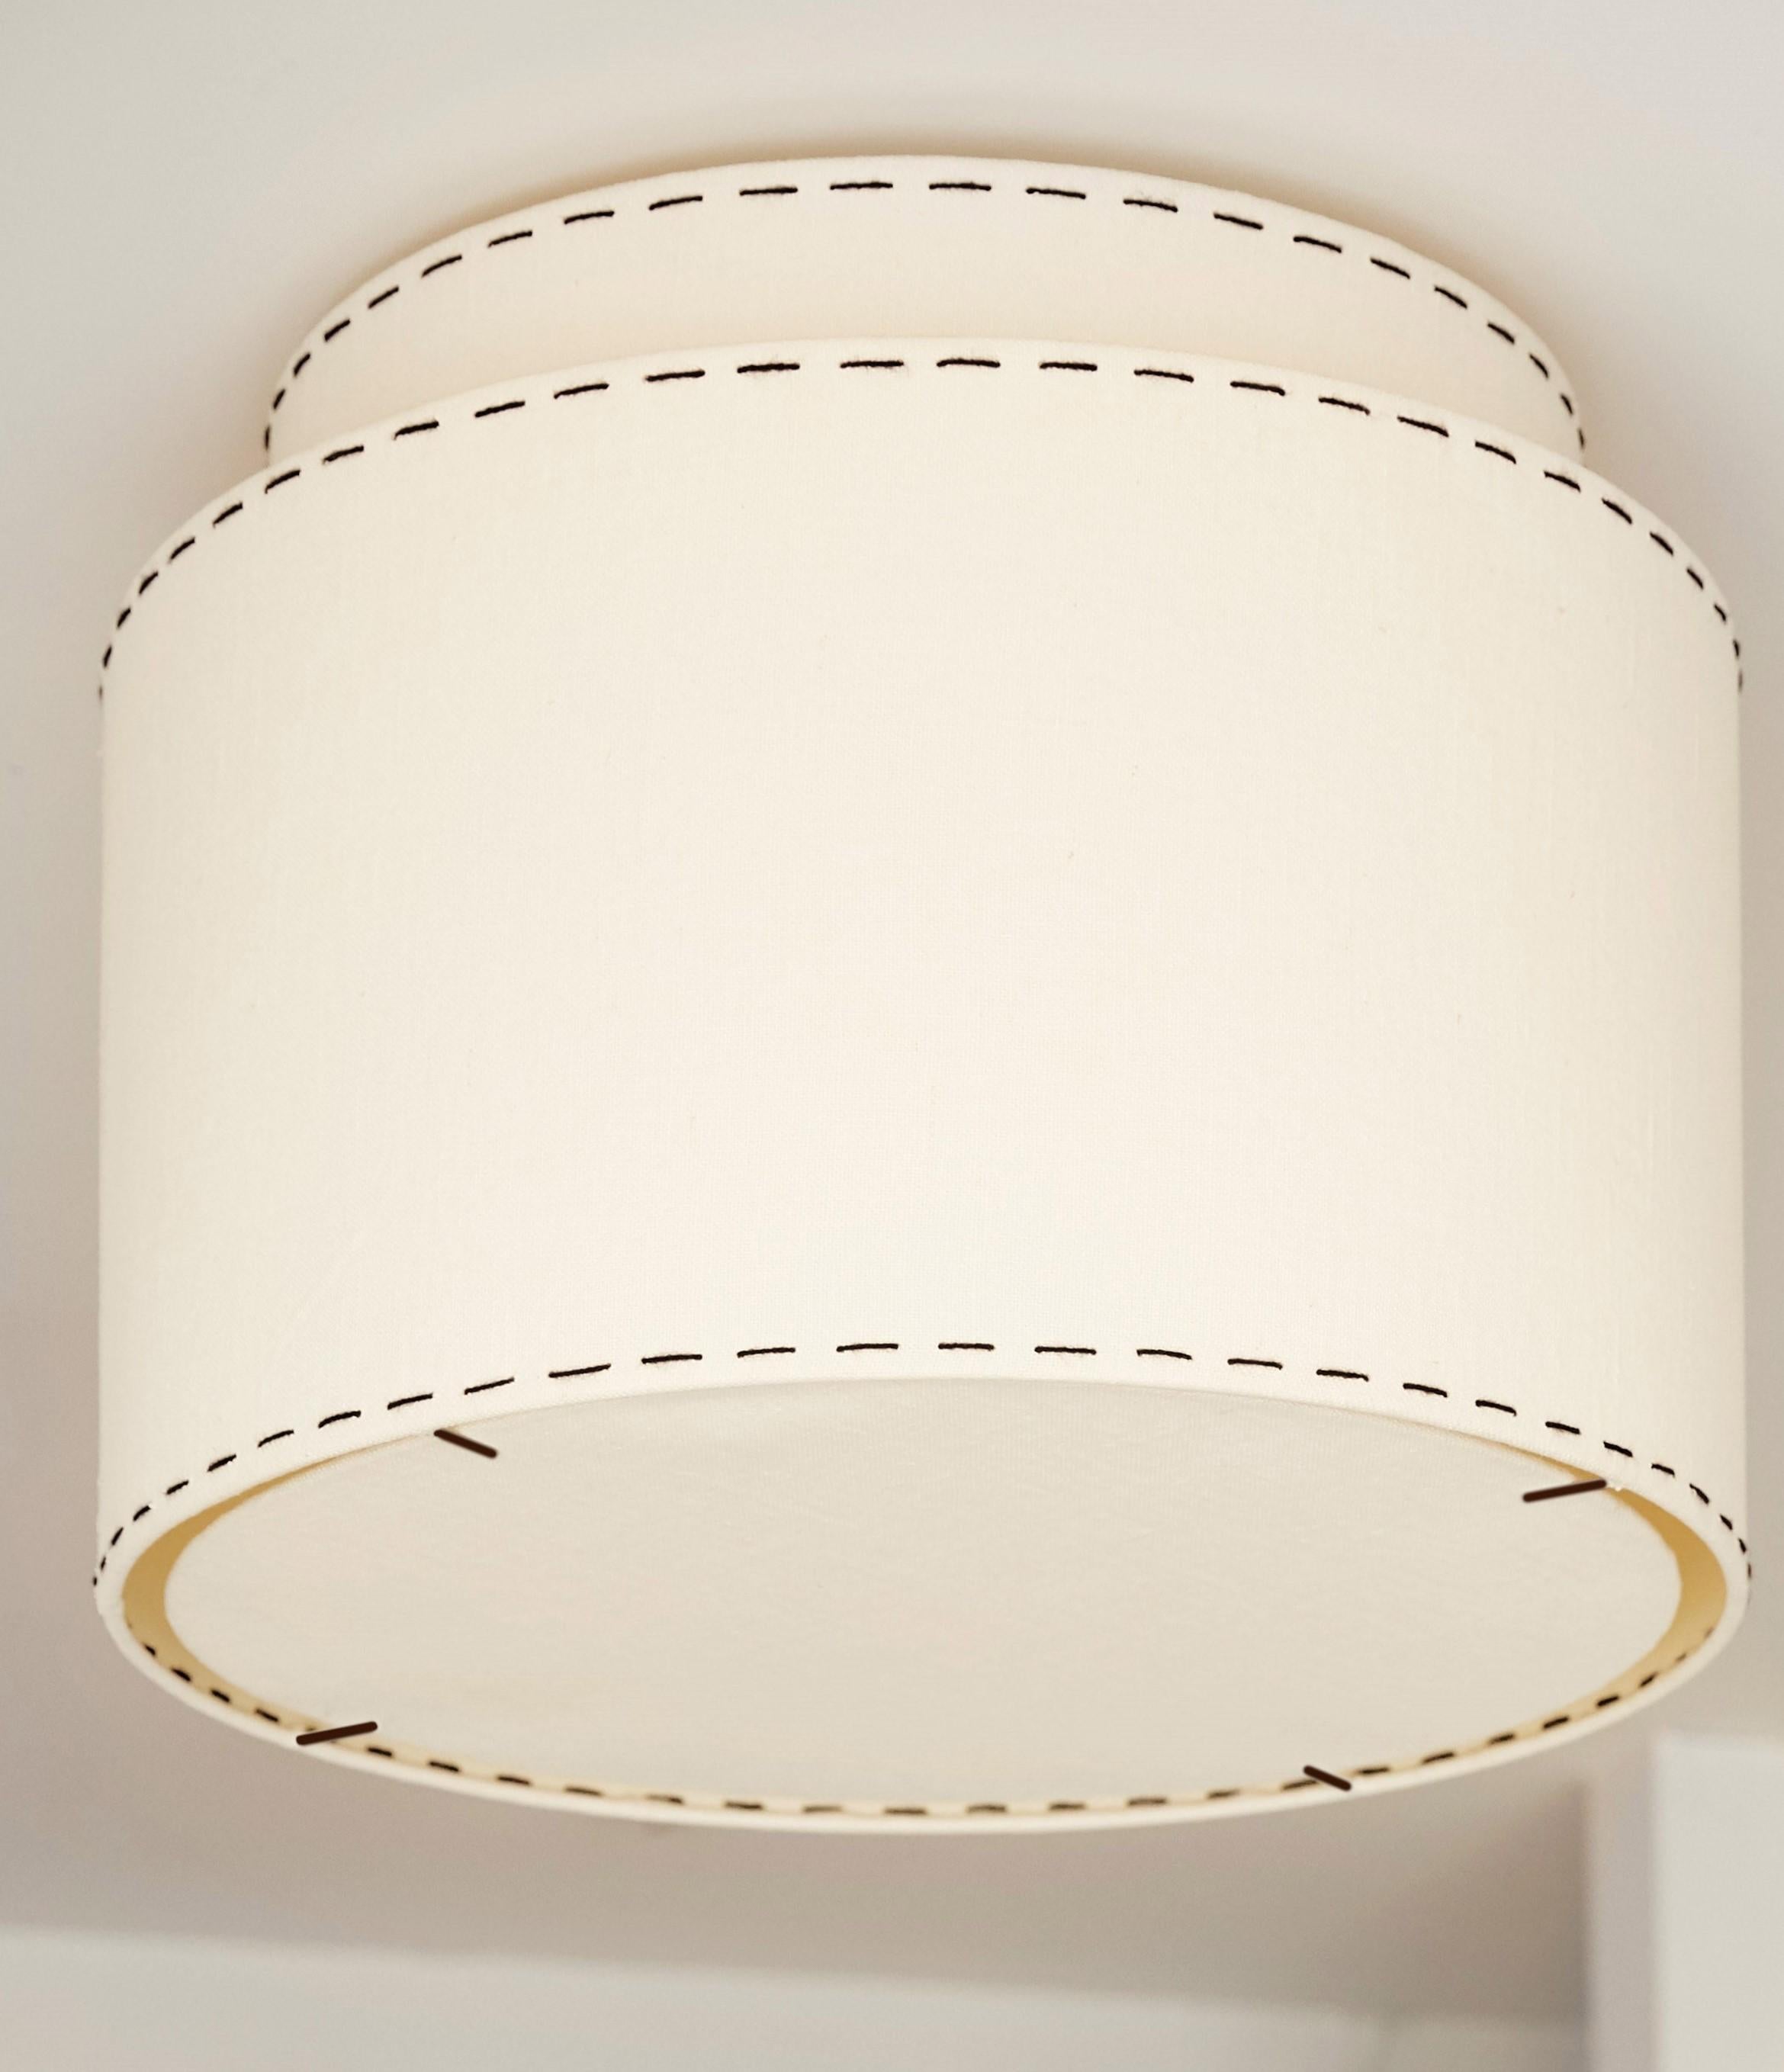 This classic, tailored, double ceiling lamp, is inspired by old Hollywood and menswear, reminiscent of the 1940s and the early simplicity of Art Deco and 20th Century Modern. Its clean shape is the perfect foil for our signature stitching to both